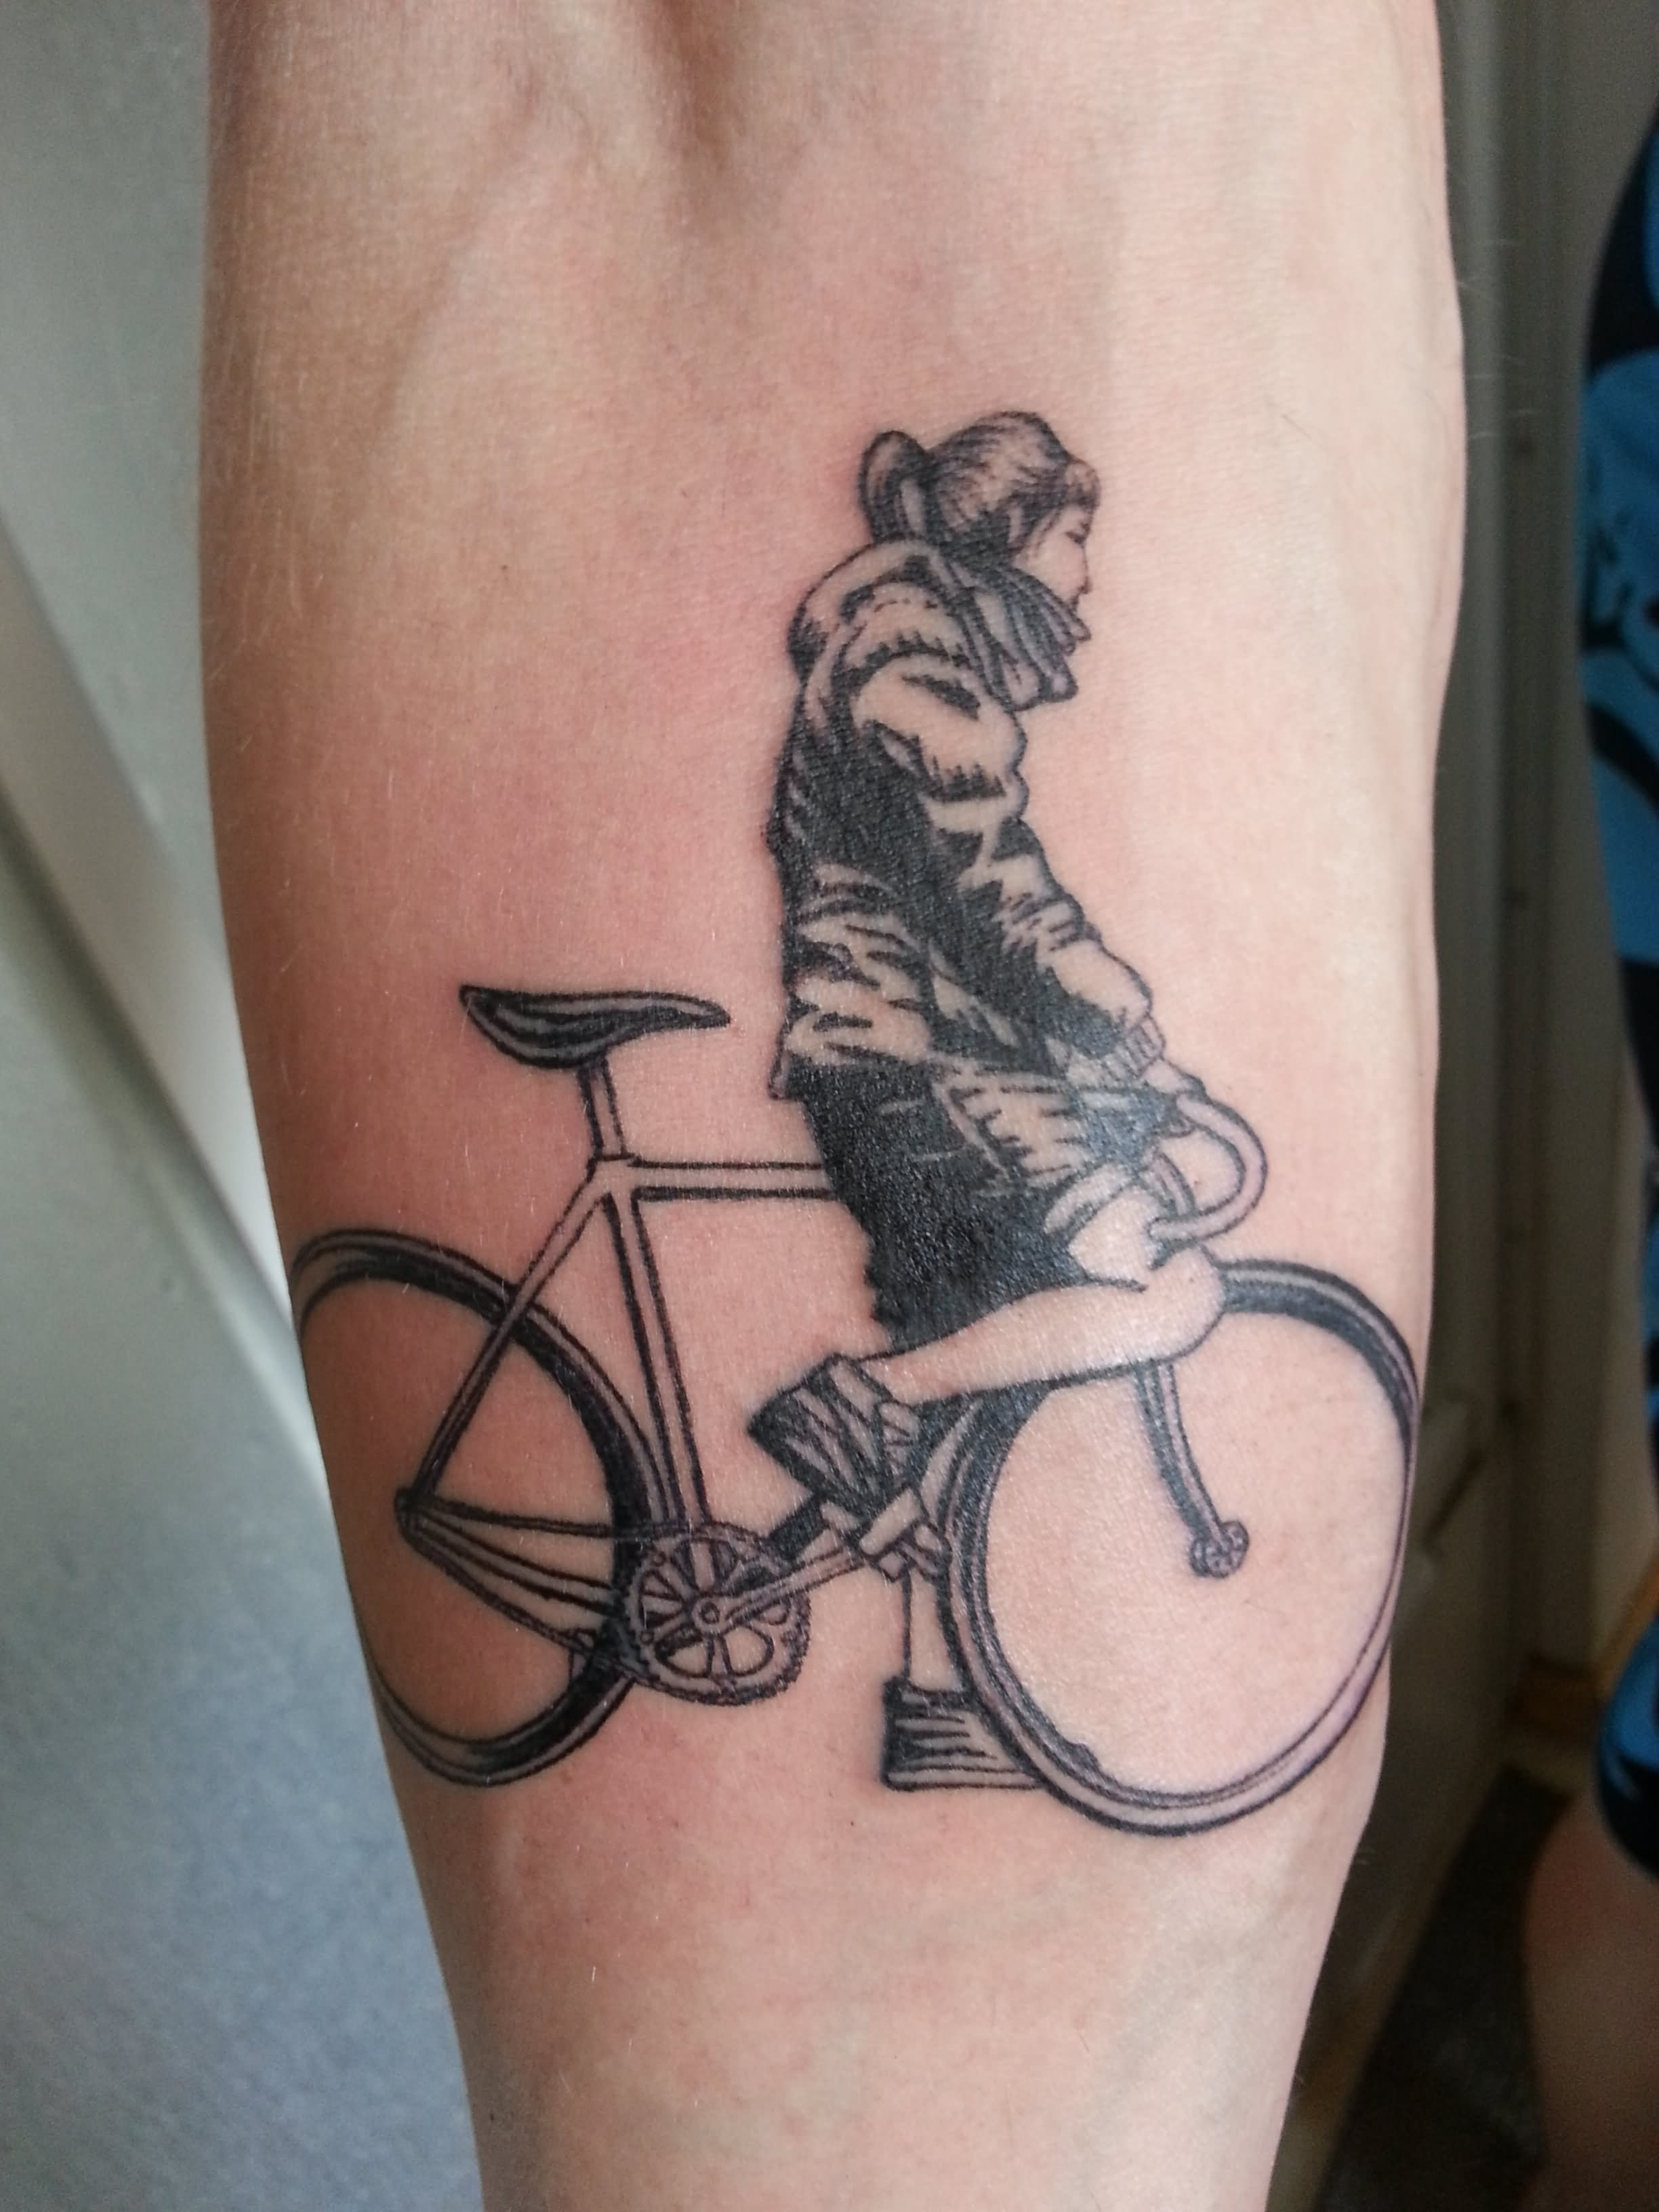 Best Bicycle Tattoo Designs | Cycle Tattoo | Bicycle Tattoos For Men  #tattoforfun #cycling #tattoo - YouTube